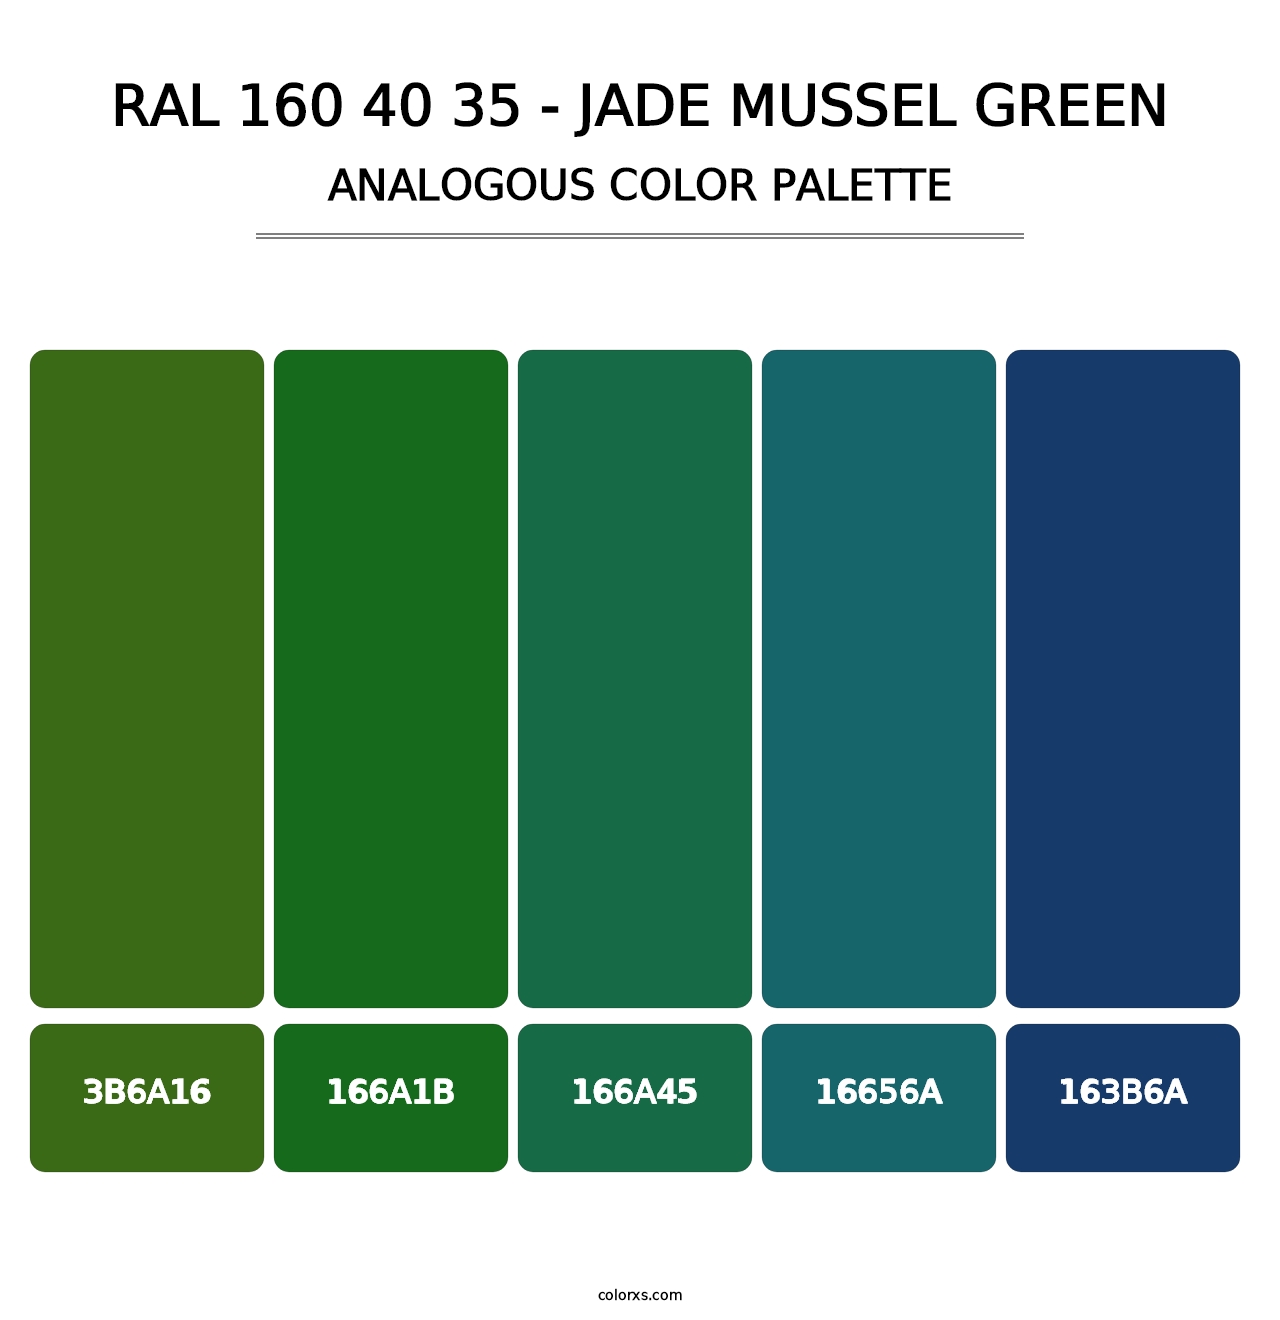 RAL 160 40 35 - Jade Mussel Green - Analogous Color Palette